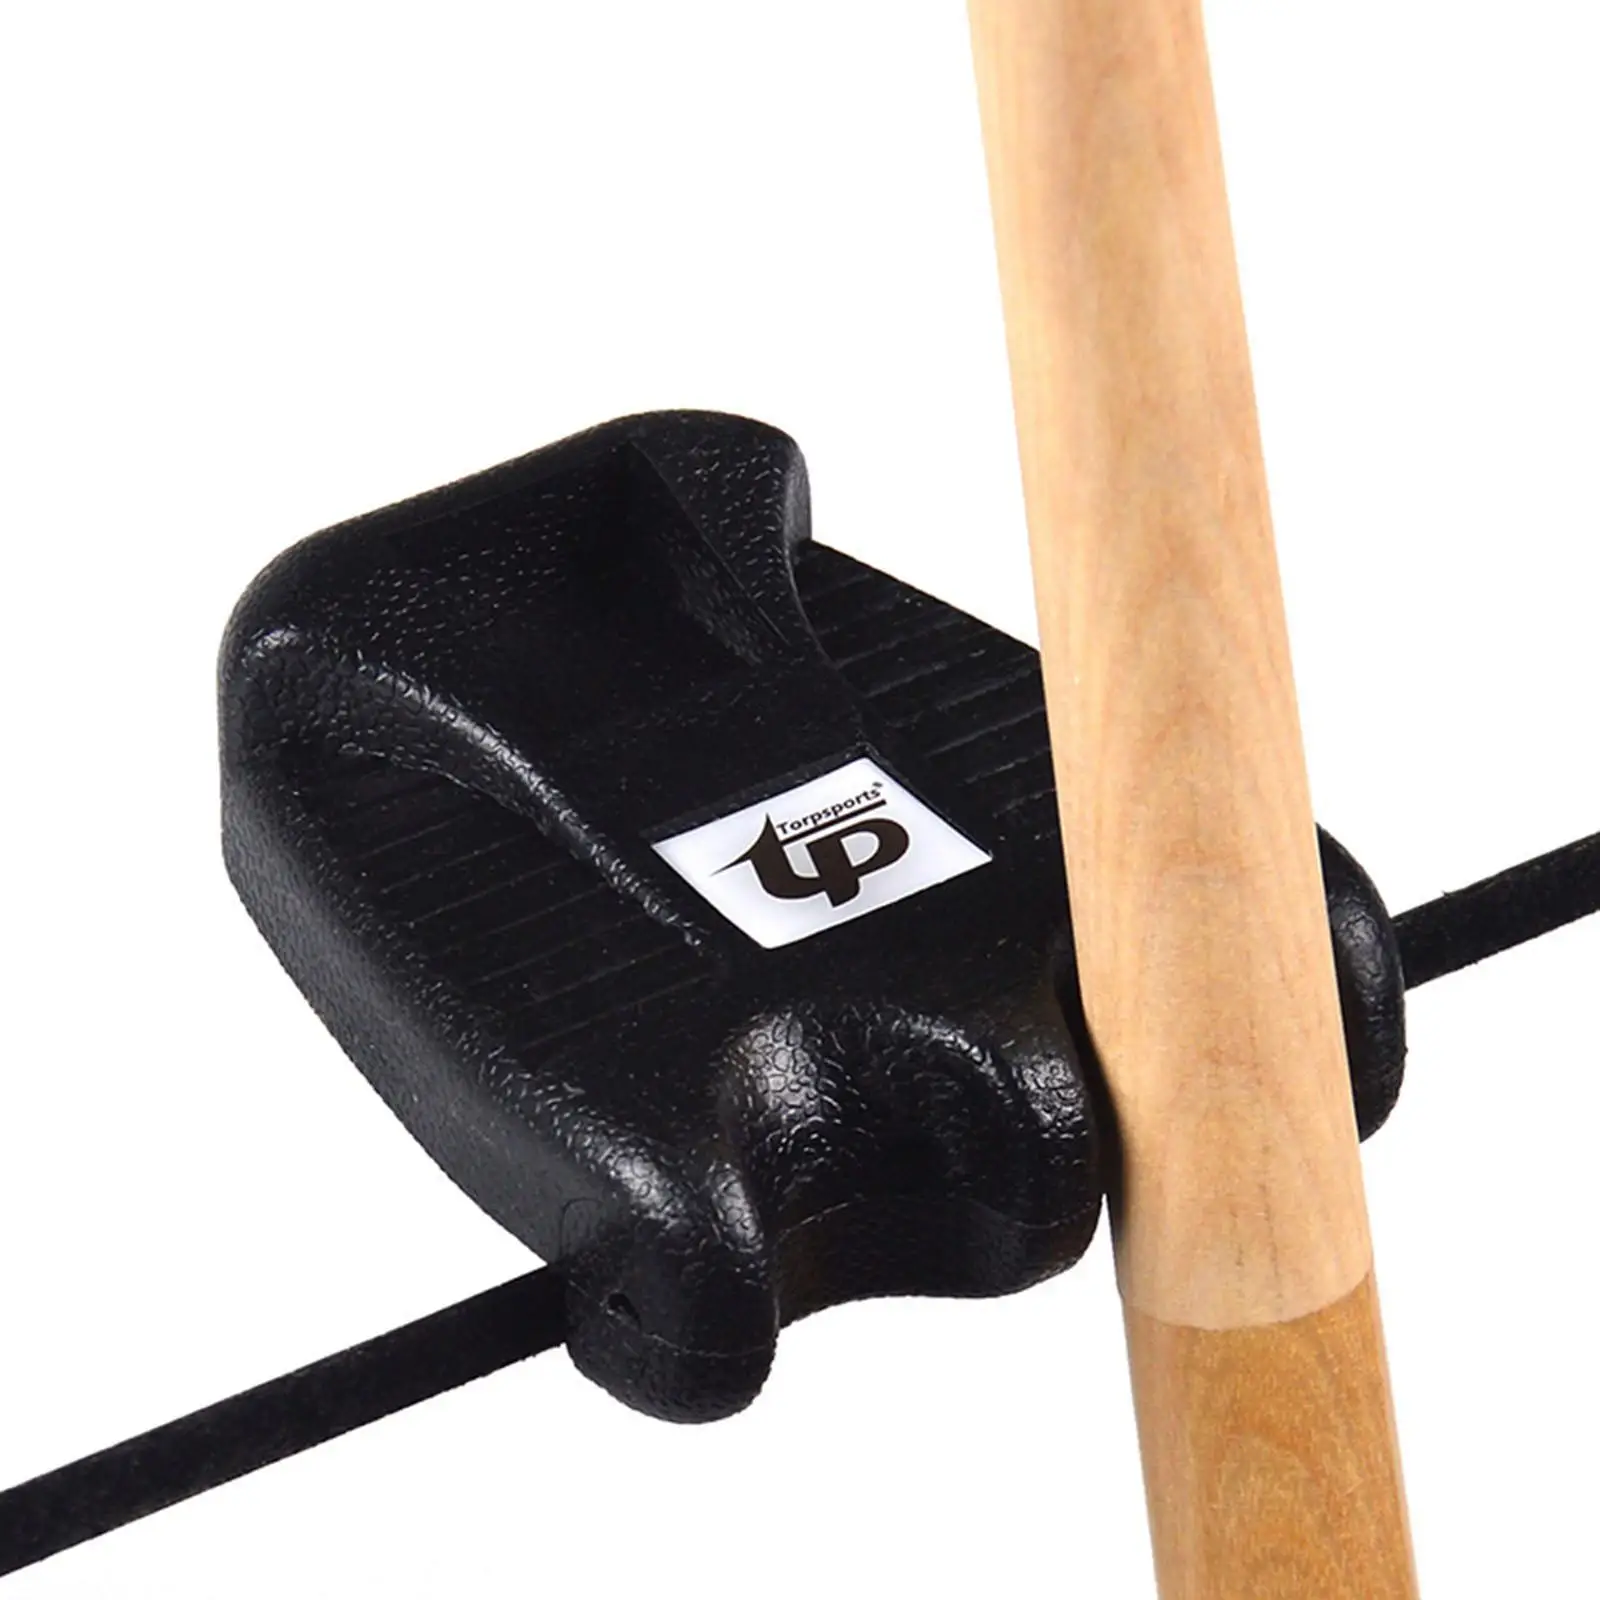 Rubber Pool Cue Holder Portable Stick Stand Snooker for Pool Clubs Bars